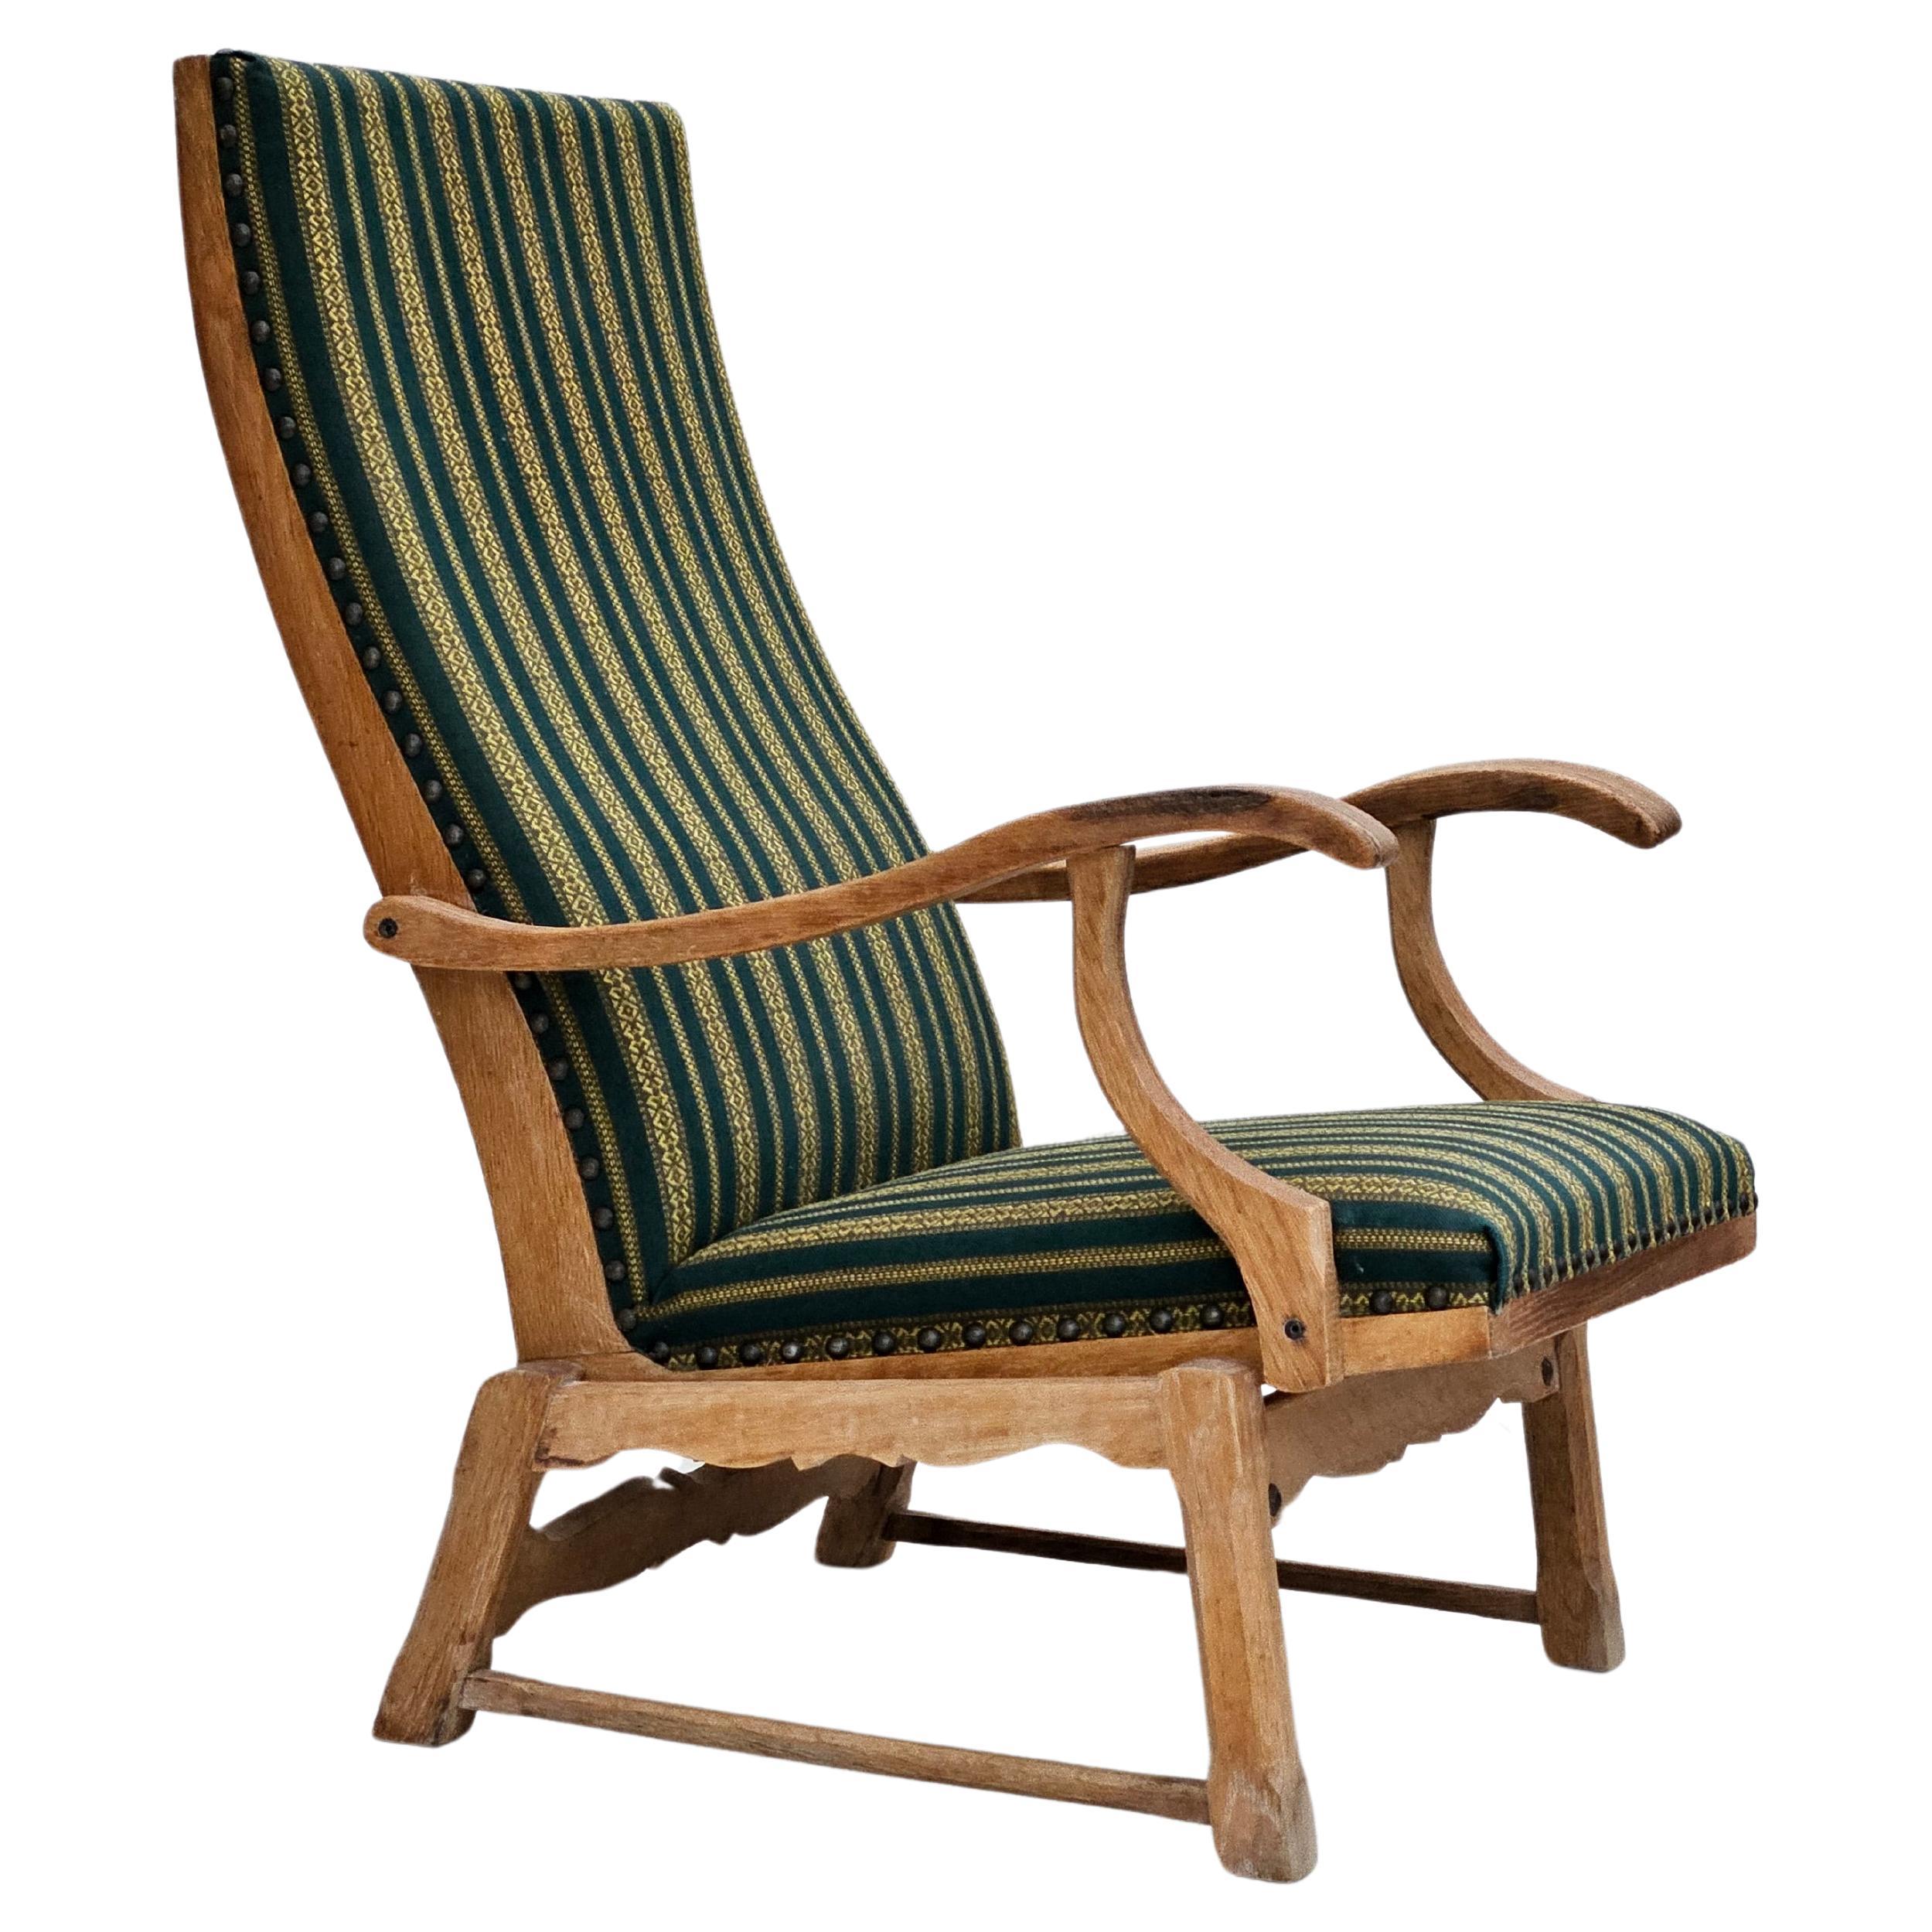 1950-60s, Danish highback rocking chair, original very good condition. For Sale